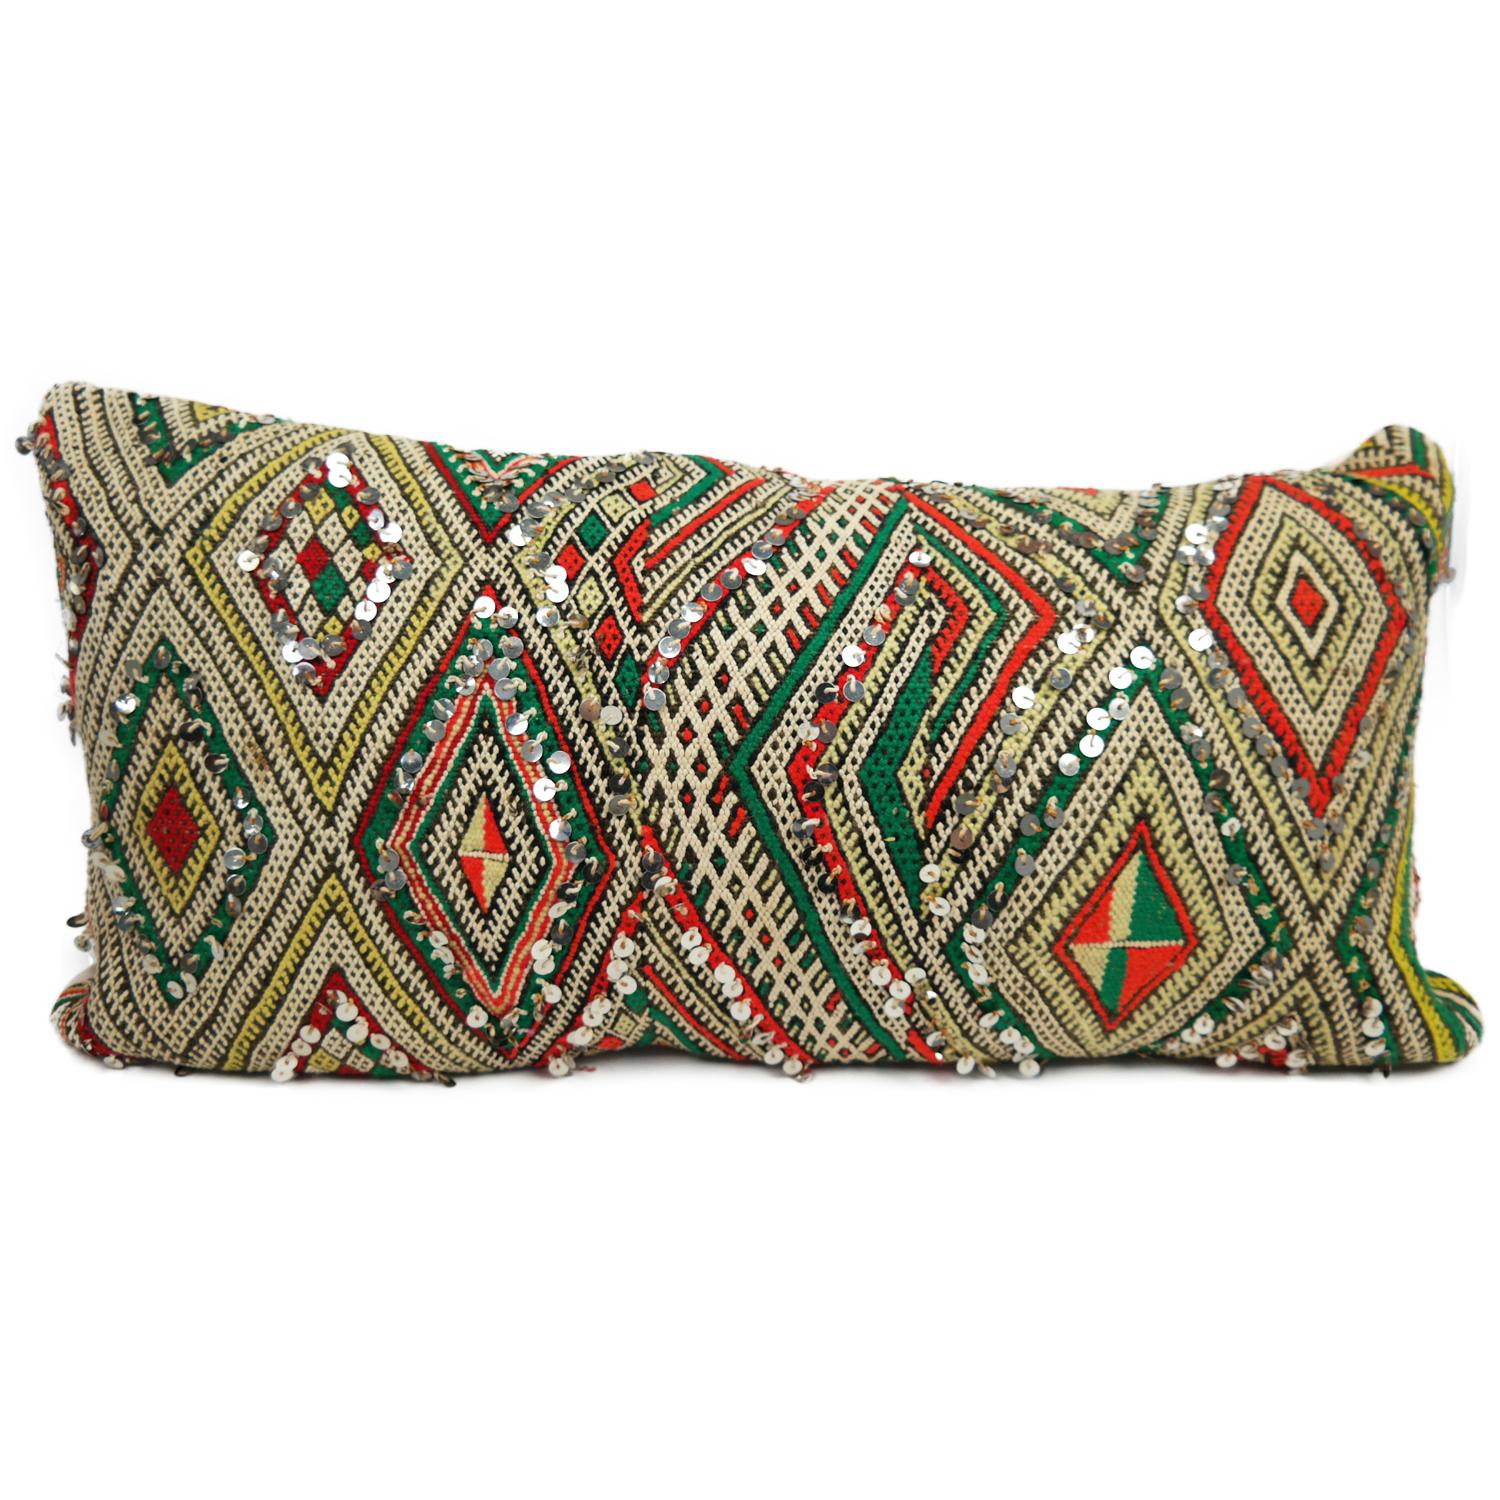 A stunning extra large Bohemian Moroccan Kilim cushion custom made in Morocco. Cut from a circa 40 years old hand loomed kilim rug, from the Middle Atlas Mountains. We have searched and selected the rug ourselves. The pillow has beautiful colors